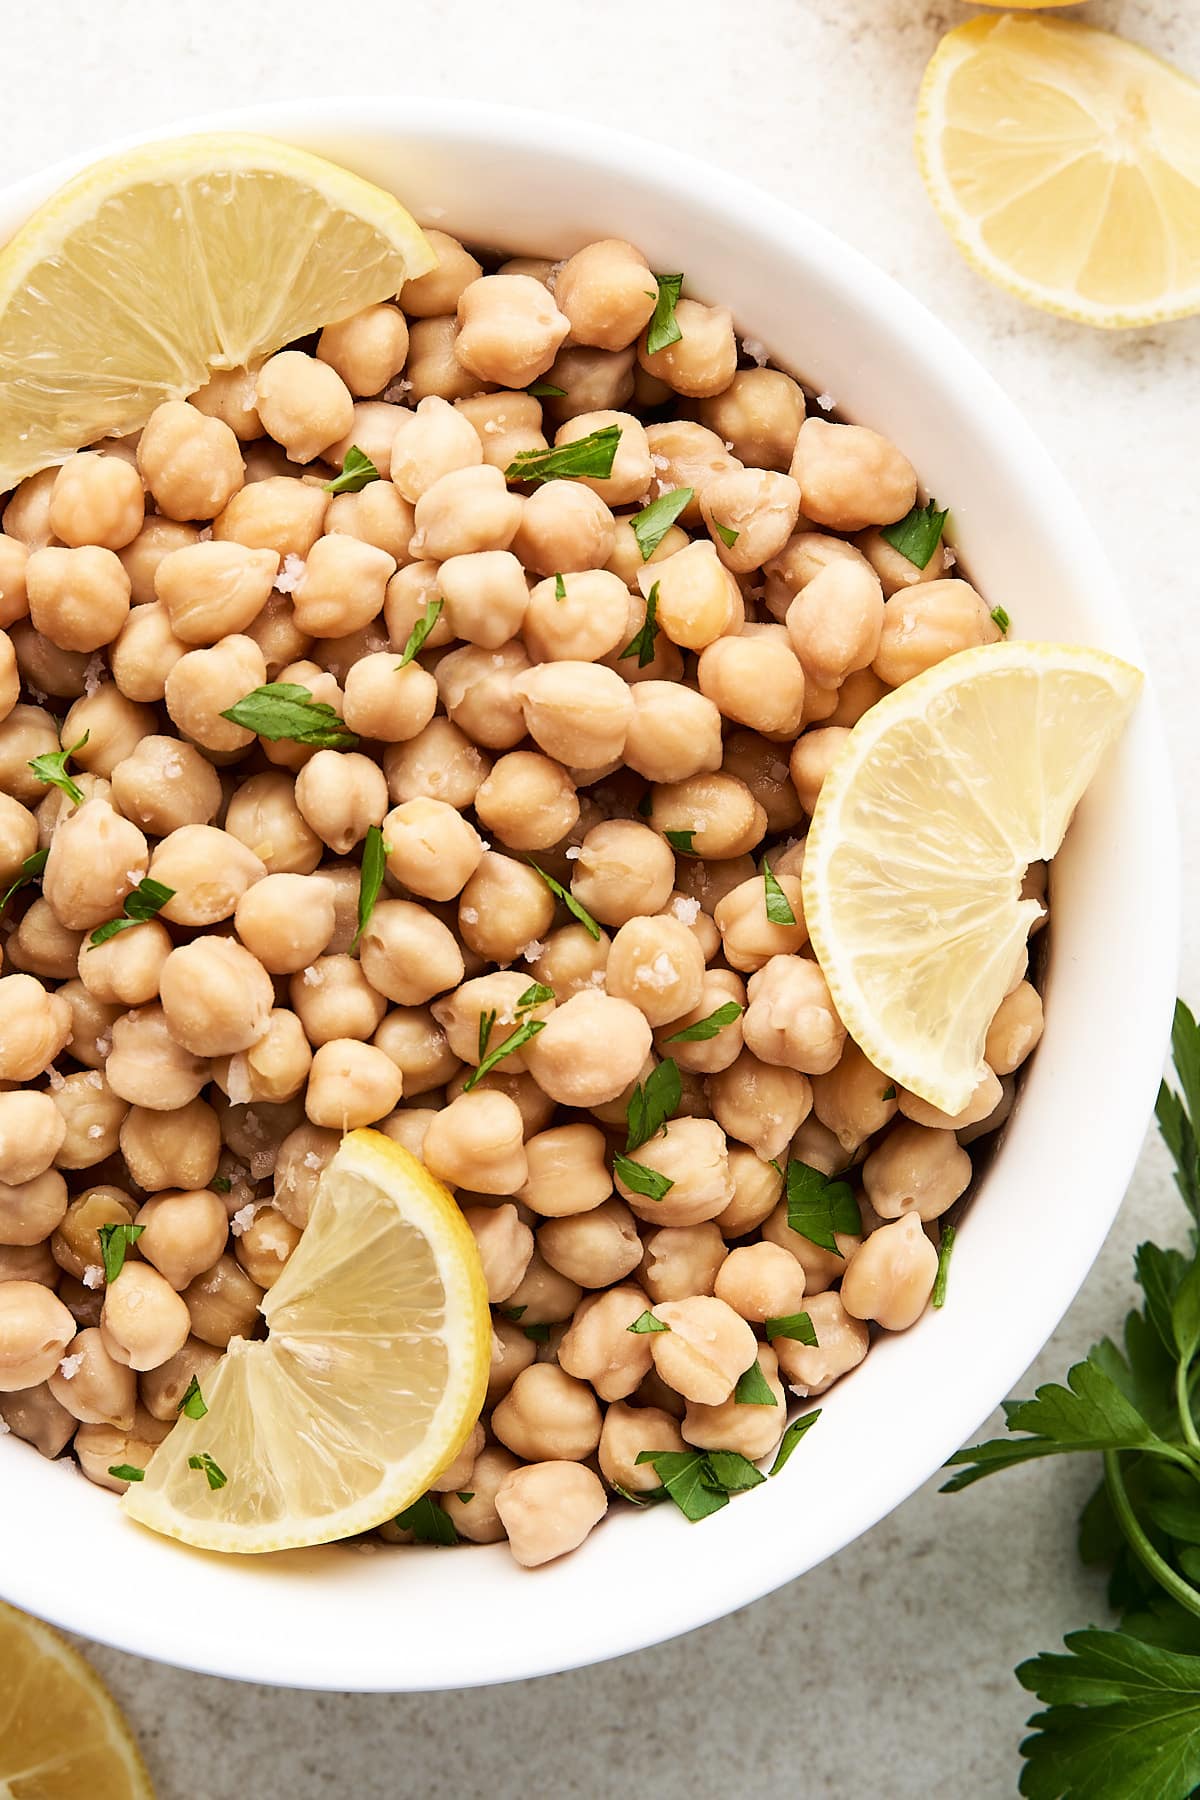 Cooked chickpeas in a bowl.